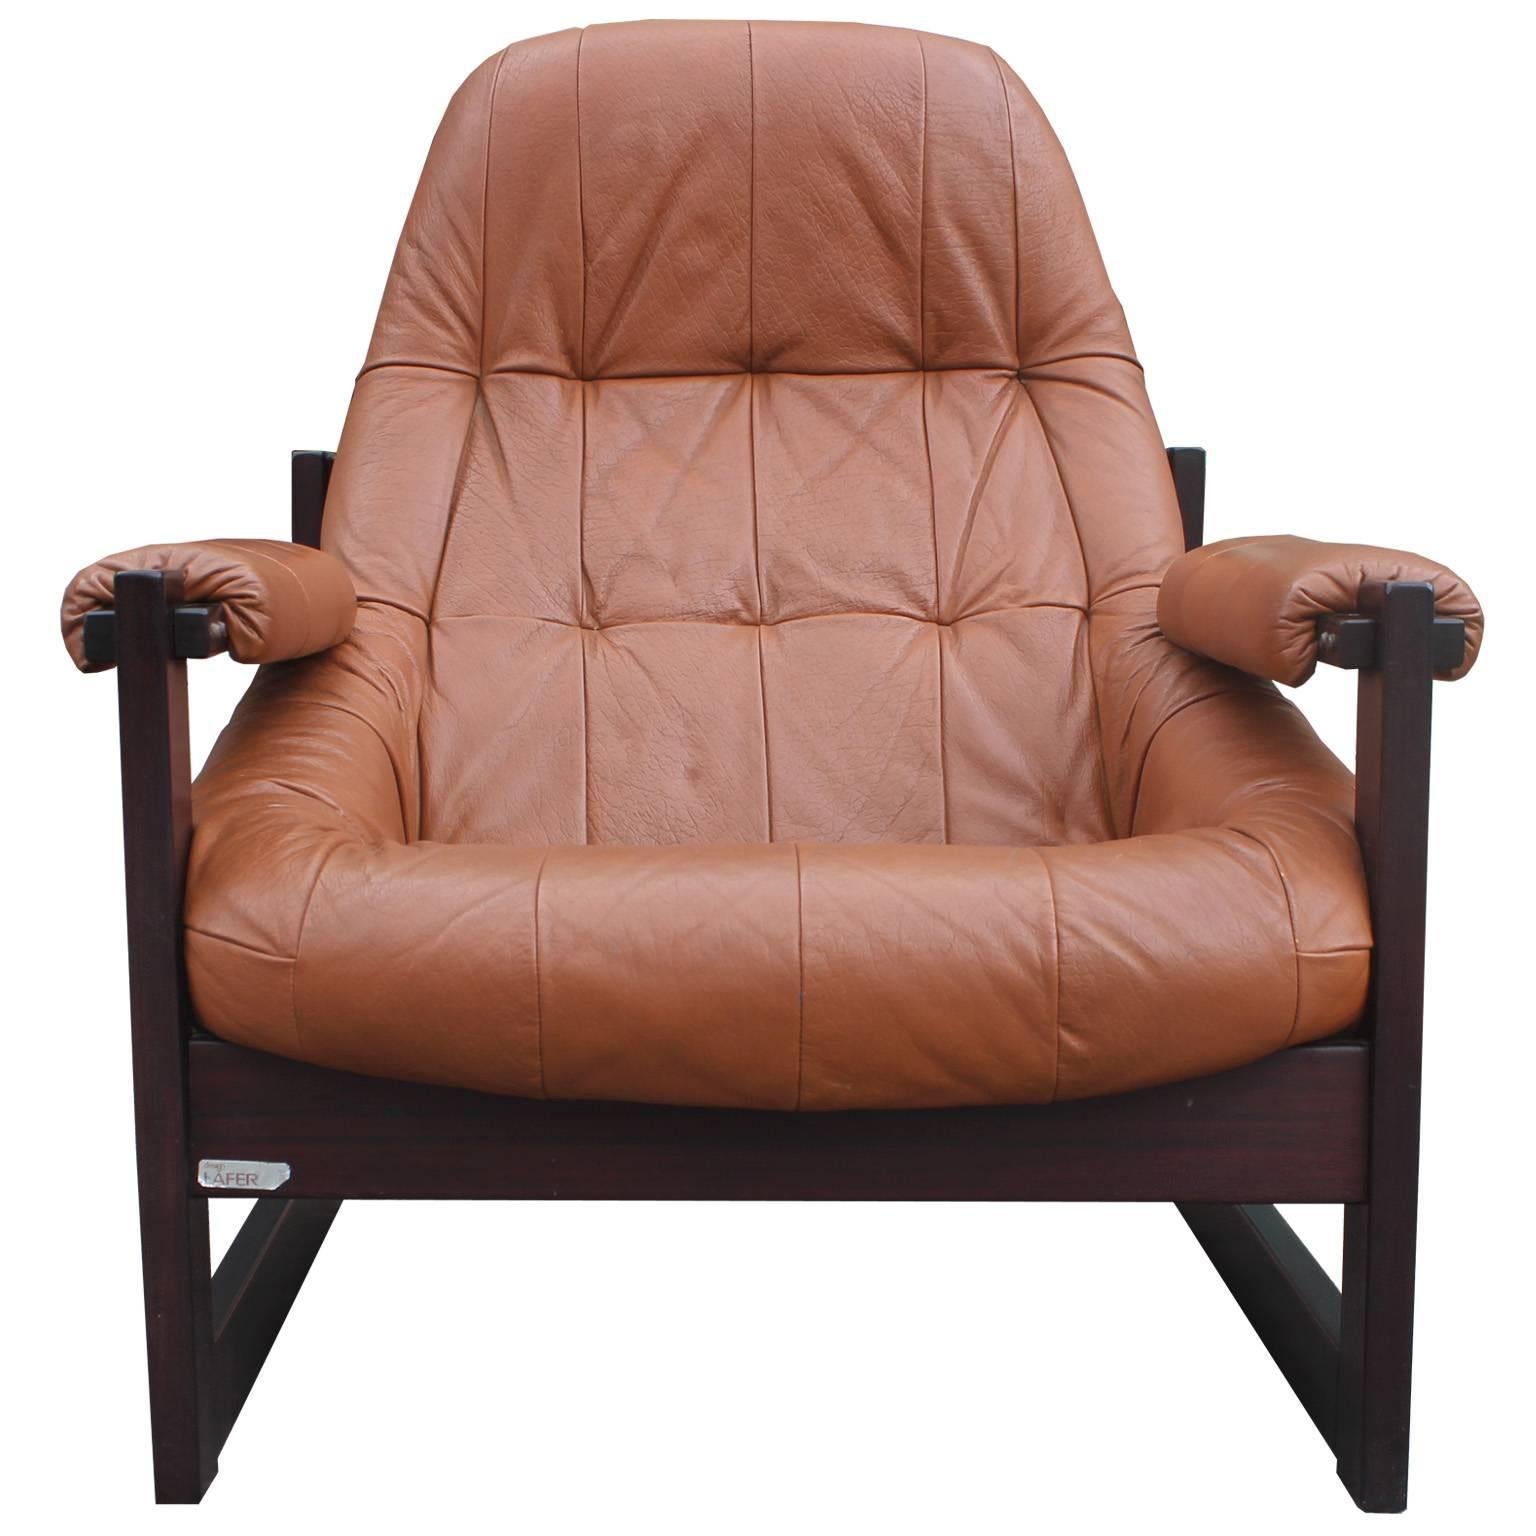 Incredible lounge chair and ottoman by Brazilian designer Percival Lafer. Ergonomic, organic shaped seat and ottoman are upholstered in original caramel brown leather. Frames are in Brazilian rosewood with shiny chrome accents. Original tags are